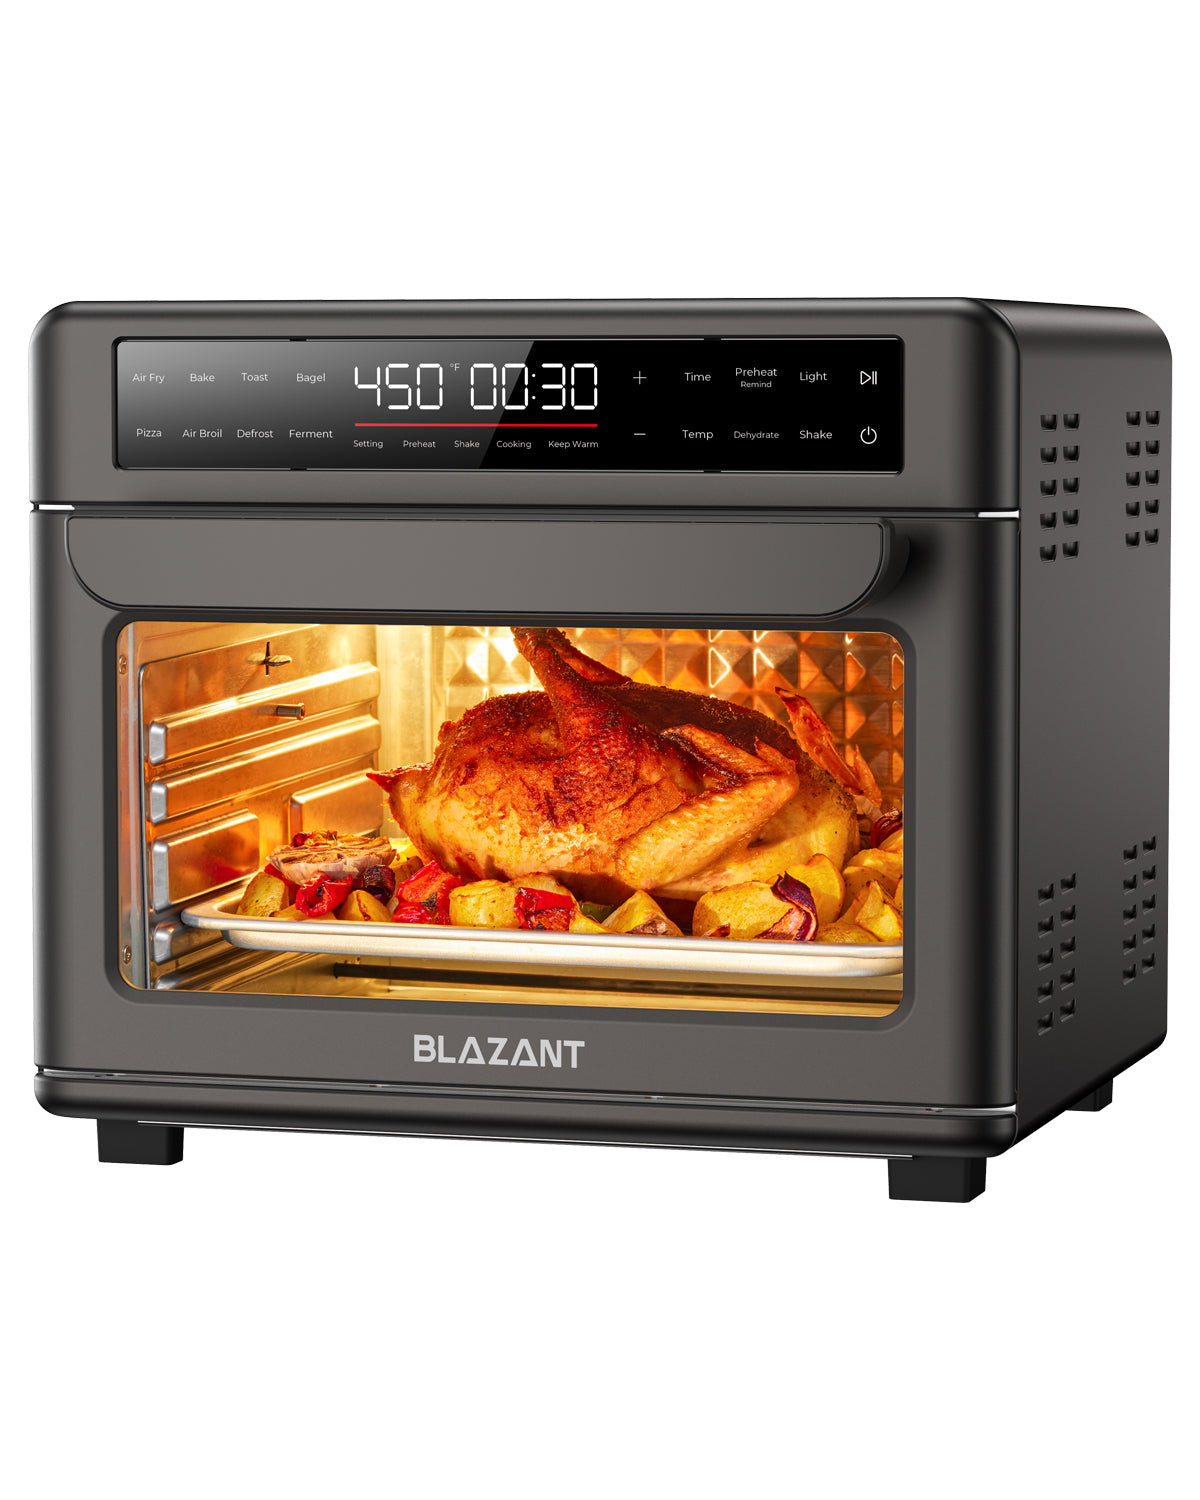 BLAZANT T-26 Toaster Oven Air Fryer Combo, 20QT/19L Air Fryers Oven, 16-in-1 Touch Keys